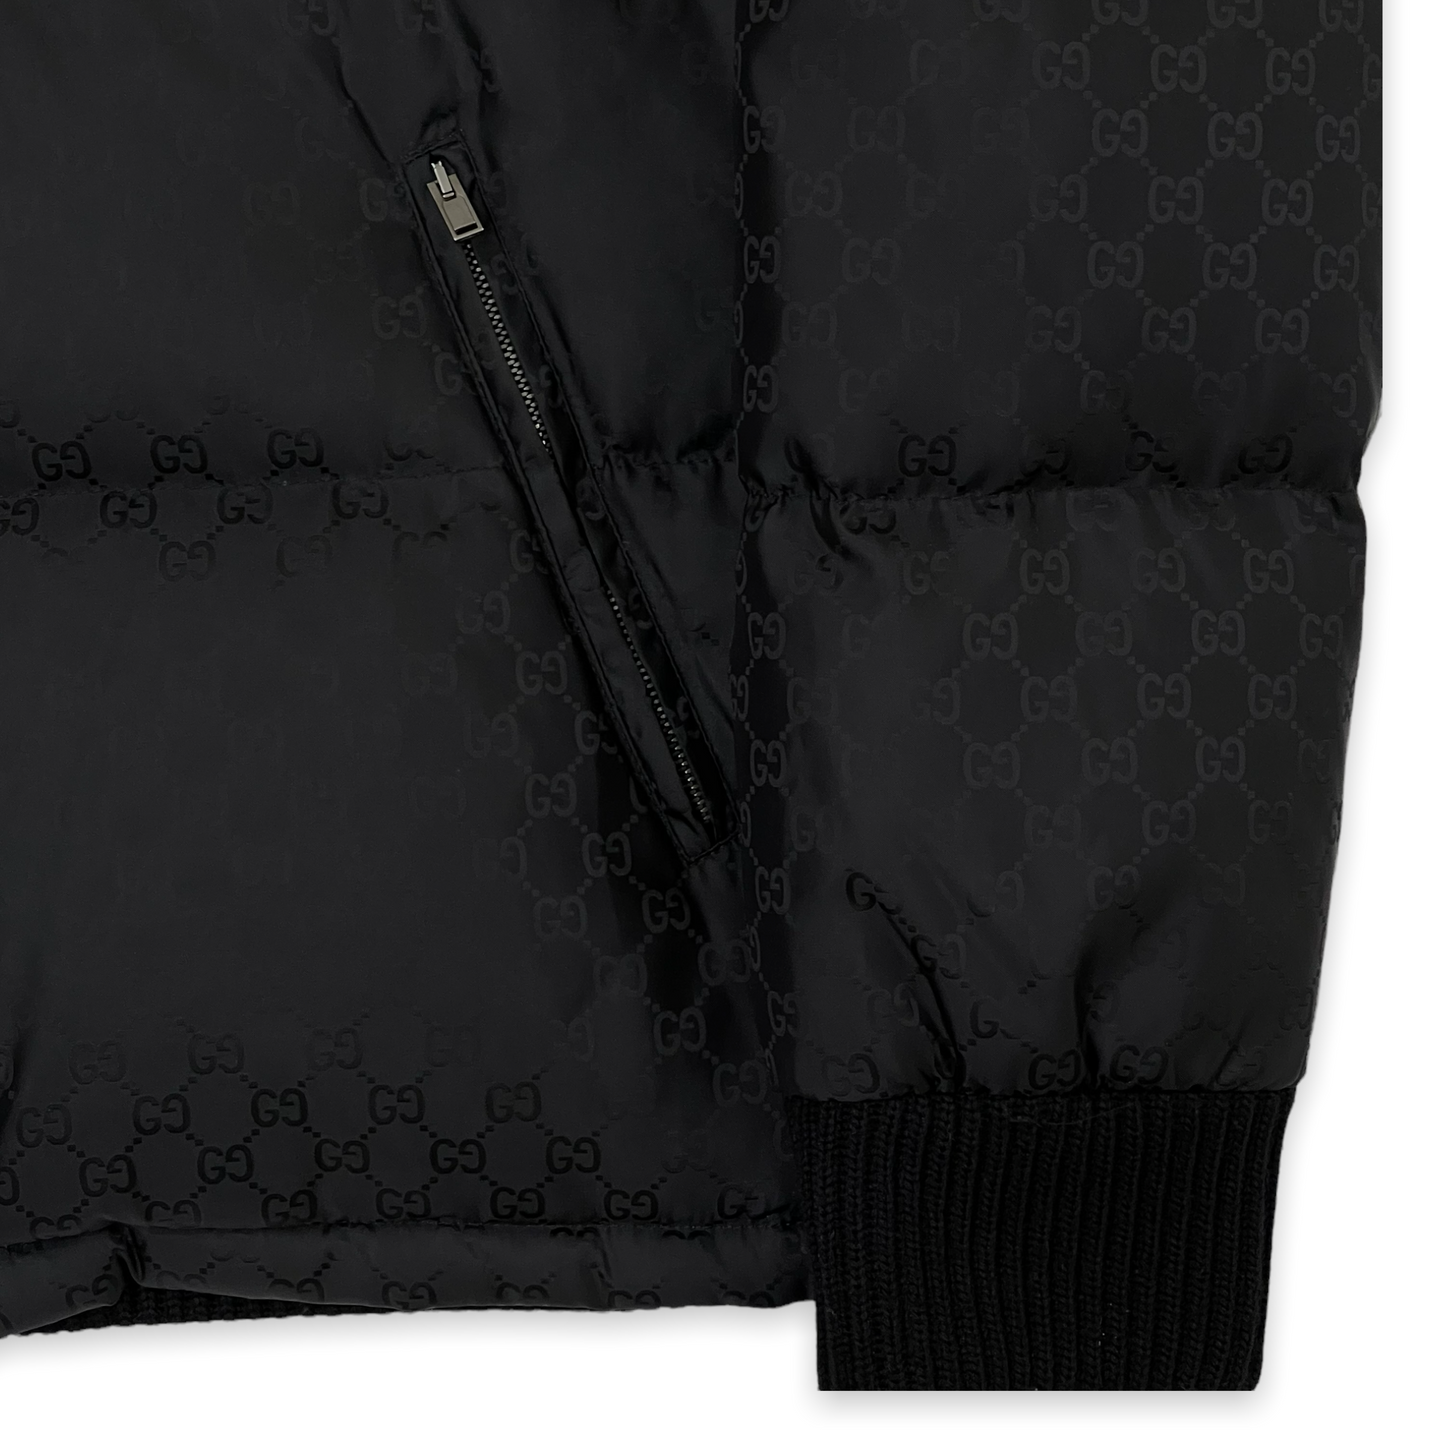 Gucci GG Padded Black Coat Vest Removeable Sleeves Size 50/Large